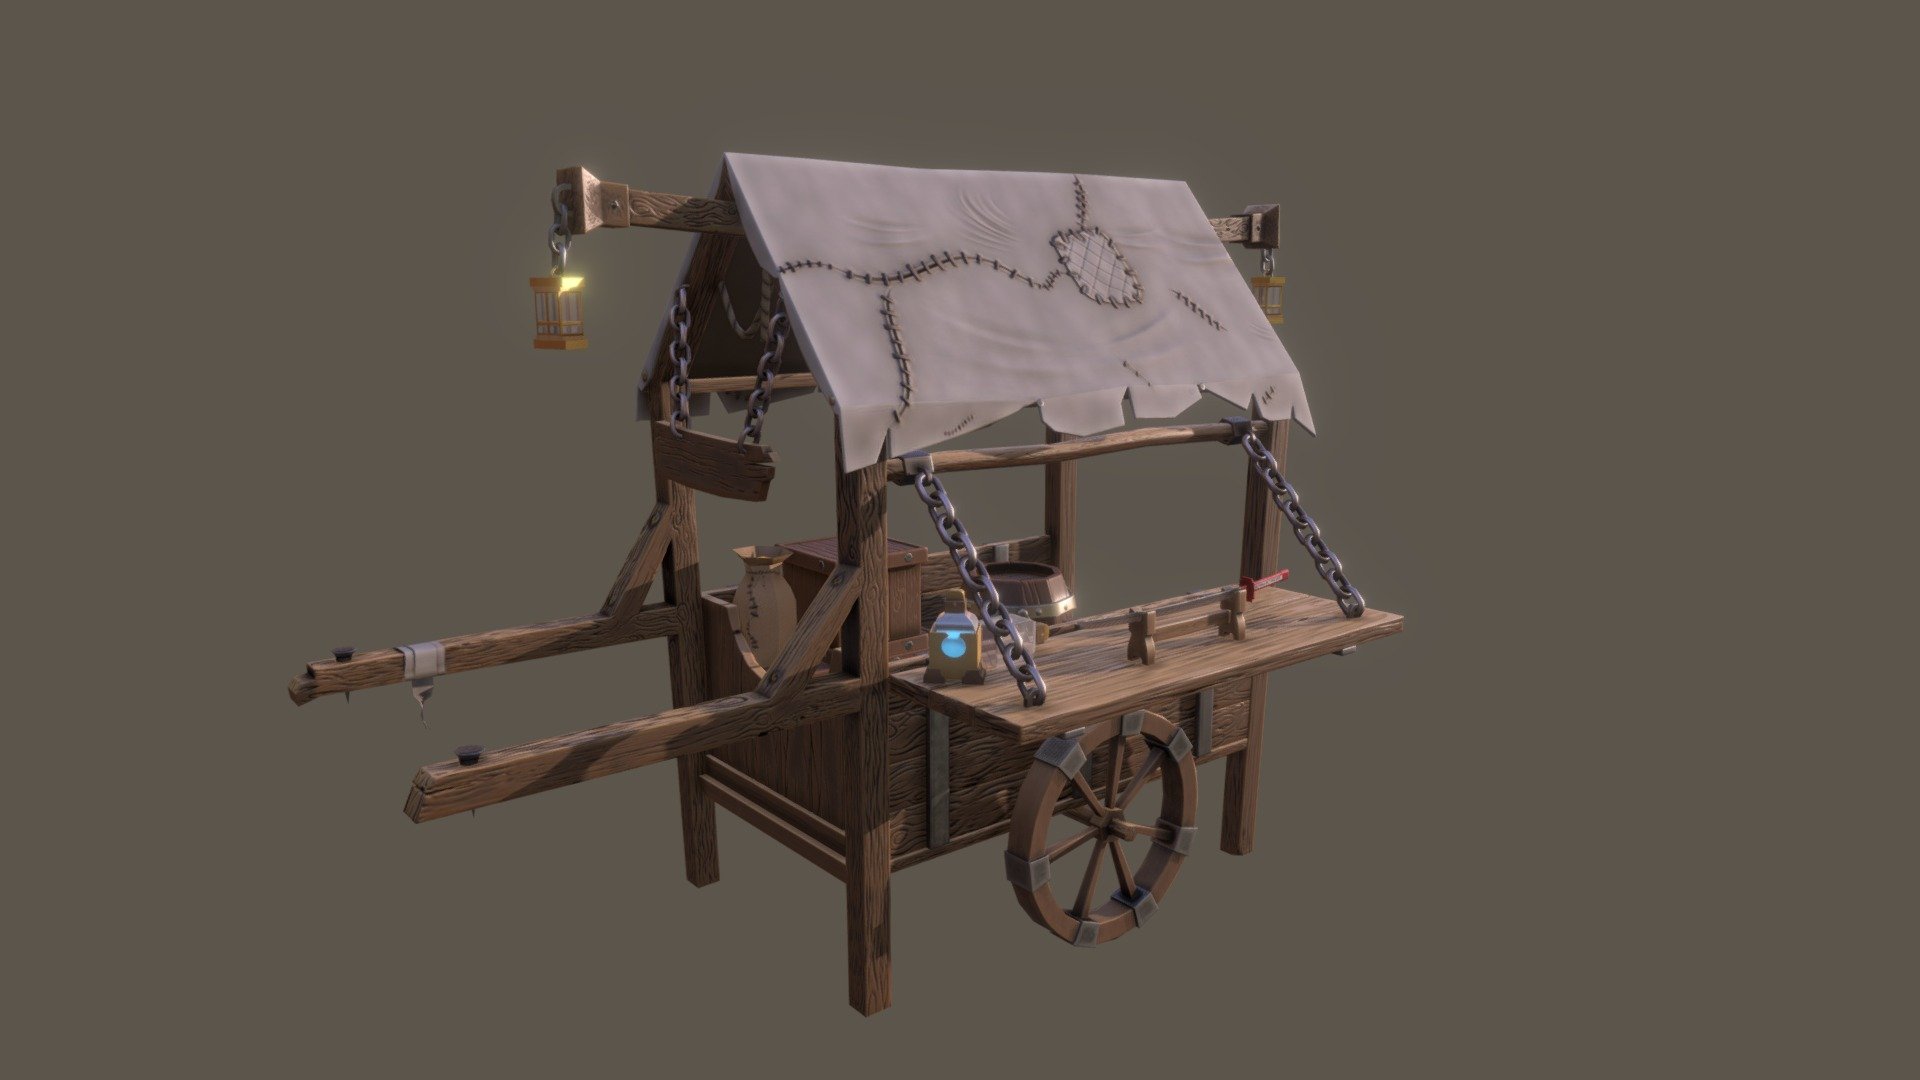 My two project
Textures 2k
Used programs: blender, zbrush, marmoset, substance painter
gameready model
3 texture groups: opacity (glass), cart and props
Unfortunately sketchfab degrades the quality of normal maps, I recommend inserting after the link: ?image_compression=0
 - Stylized magical cart - 3D model by almaz3d 3d model